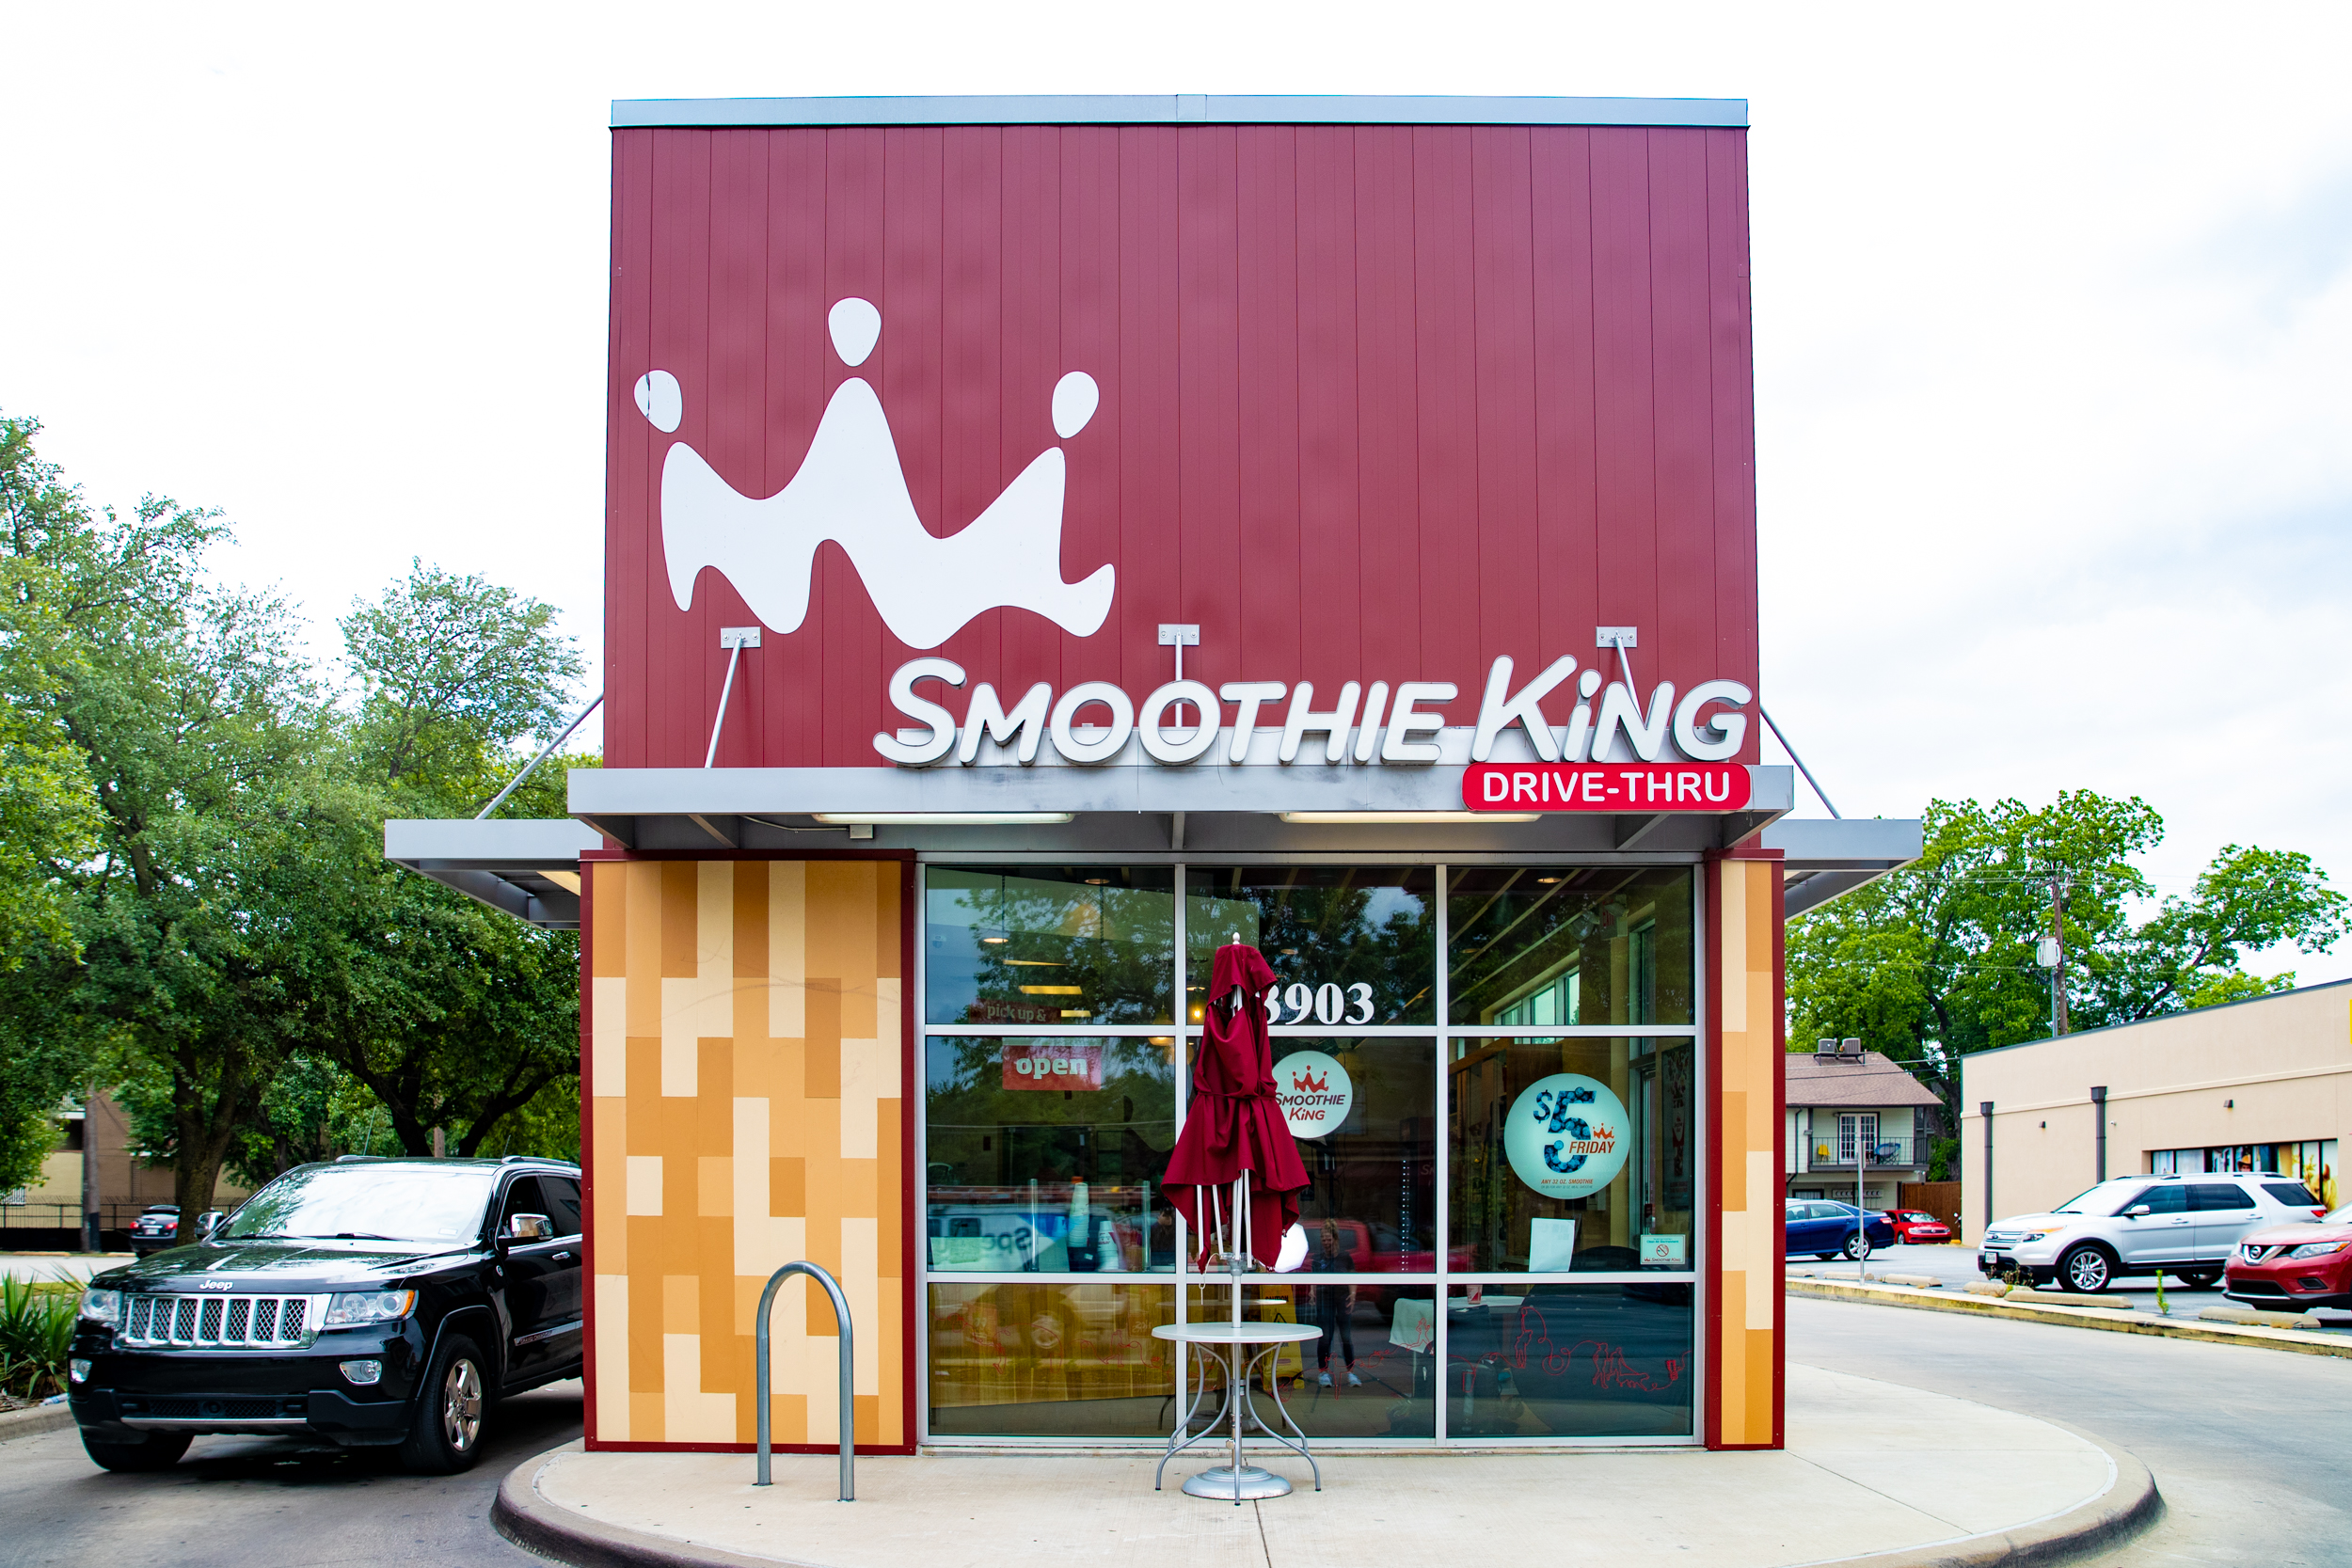 outside of a smoothie king franchise